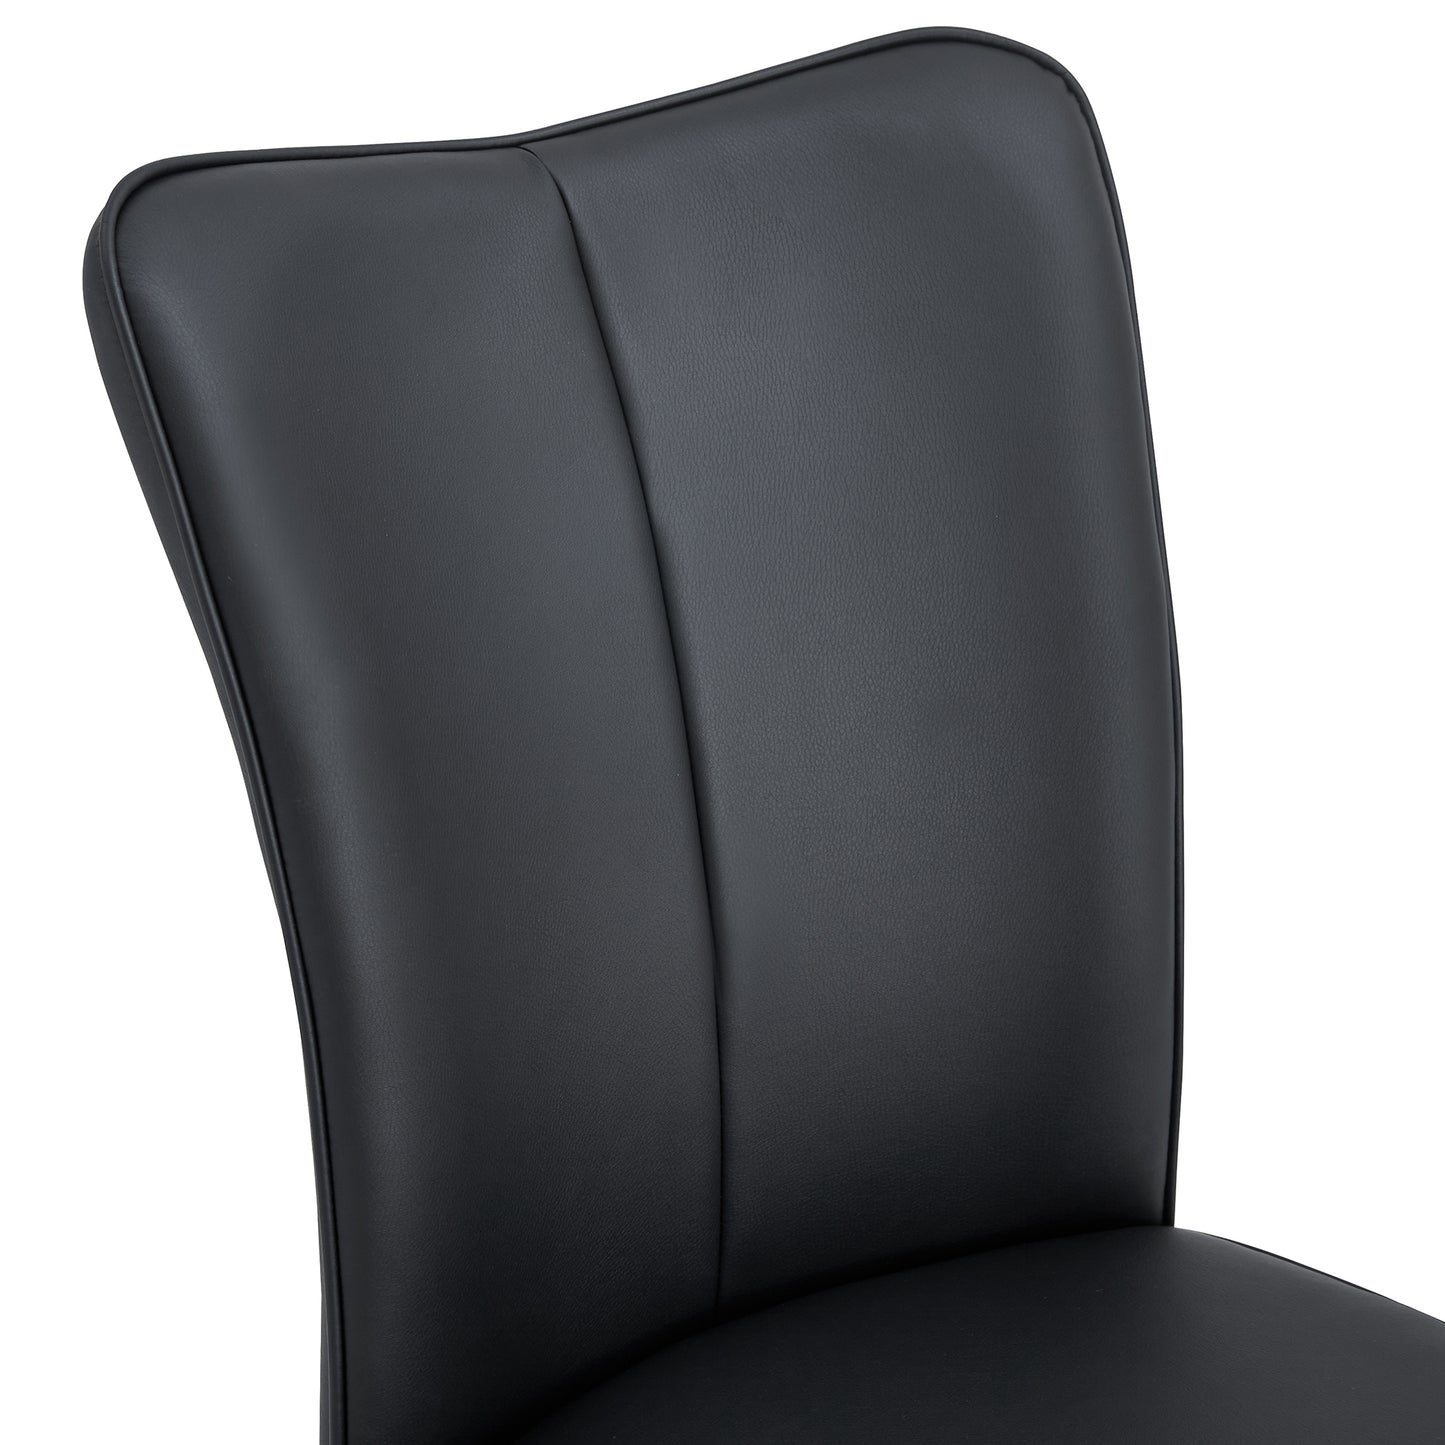 Phelps Modern minimalist dining chairs in Black. (Set of 4)